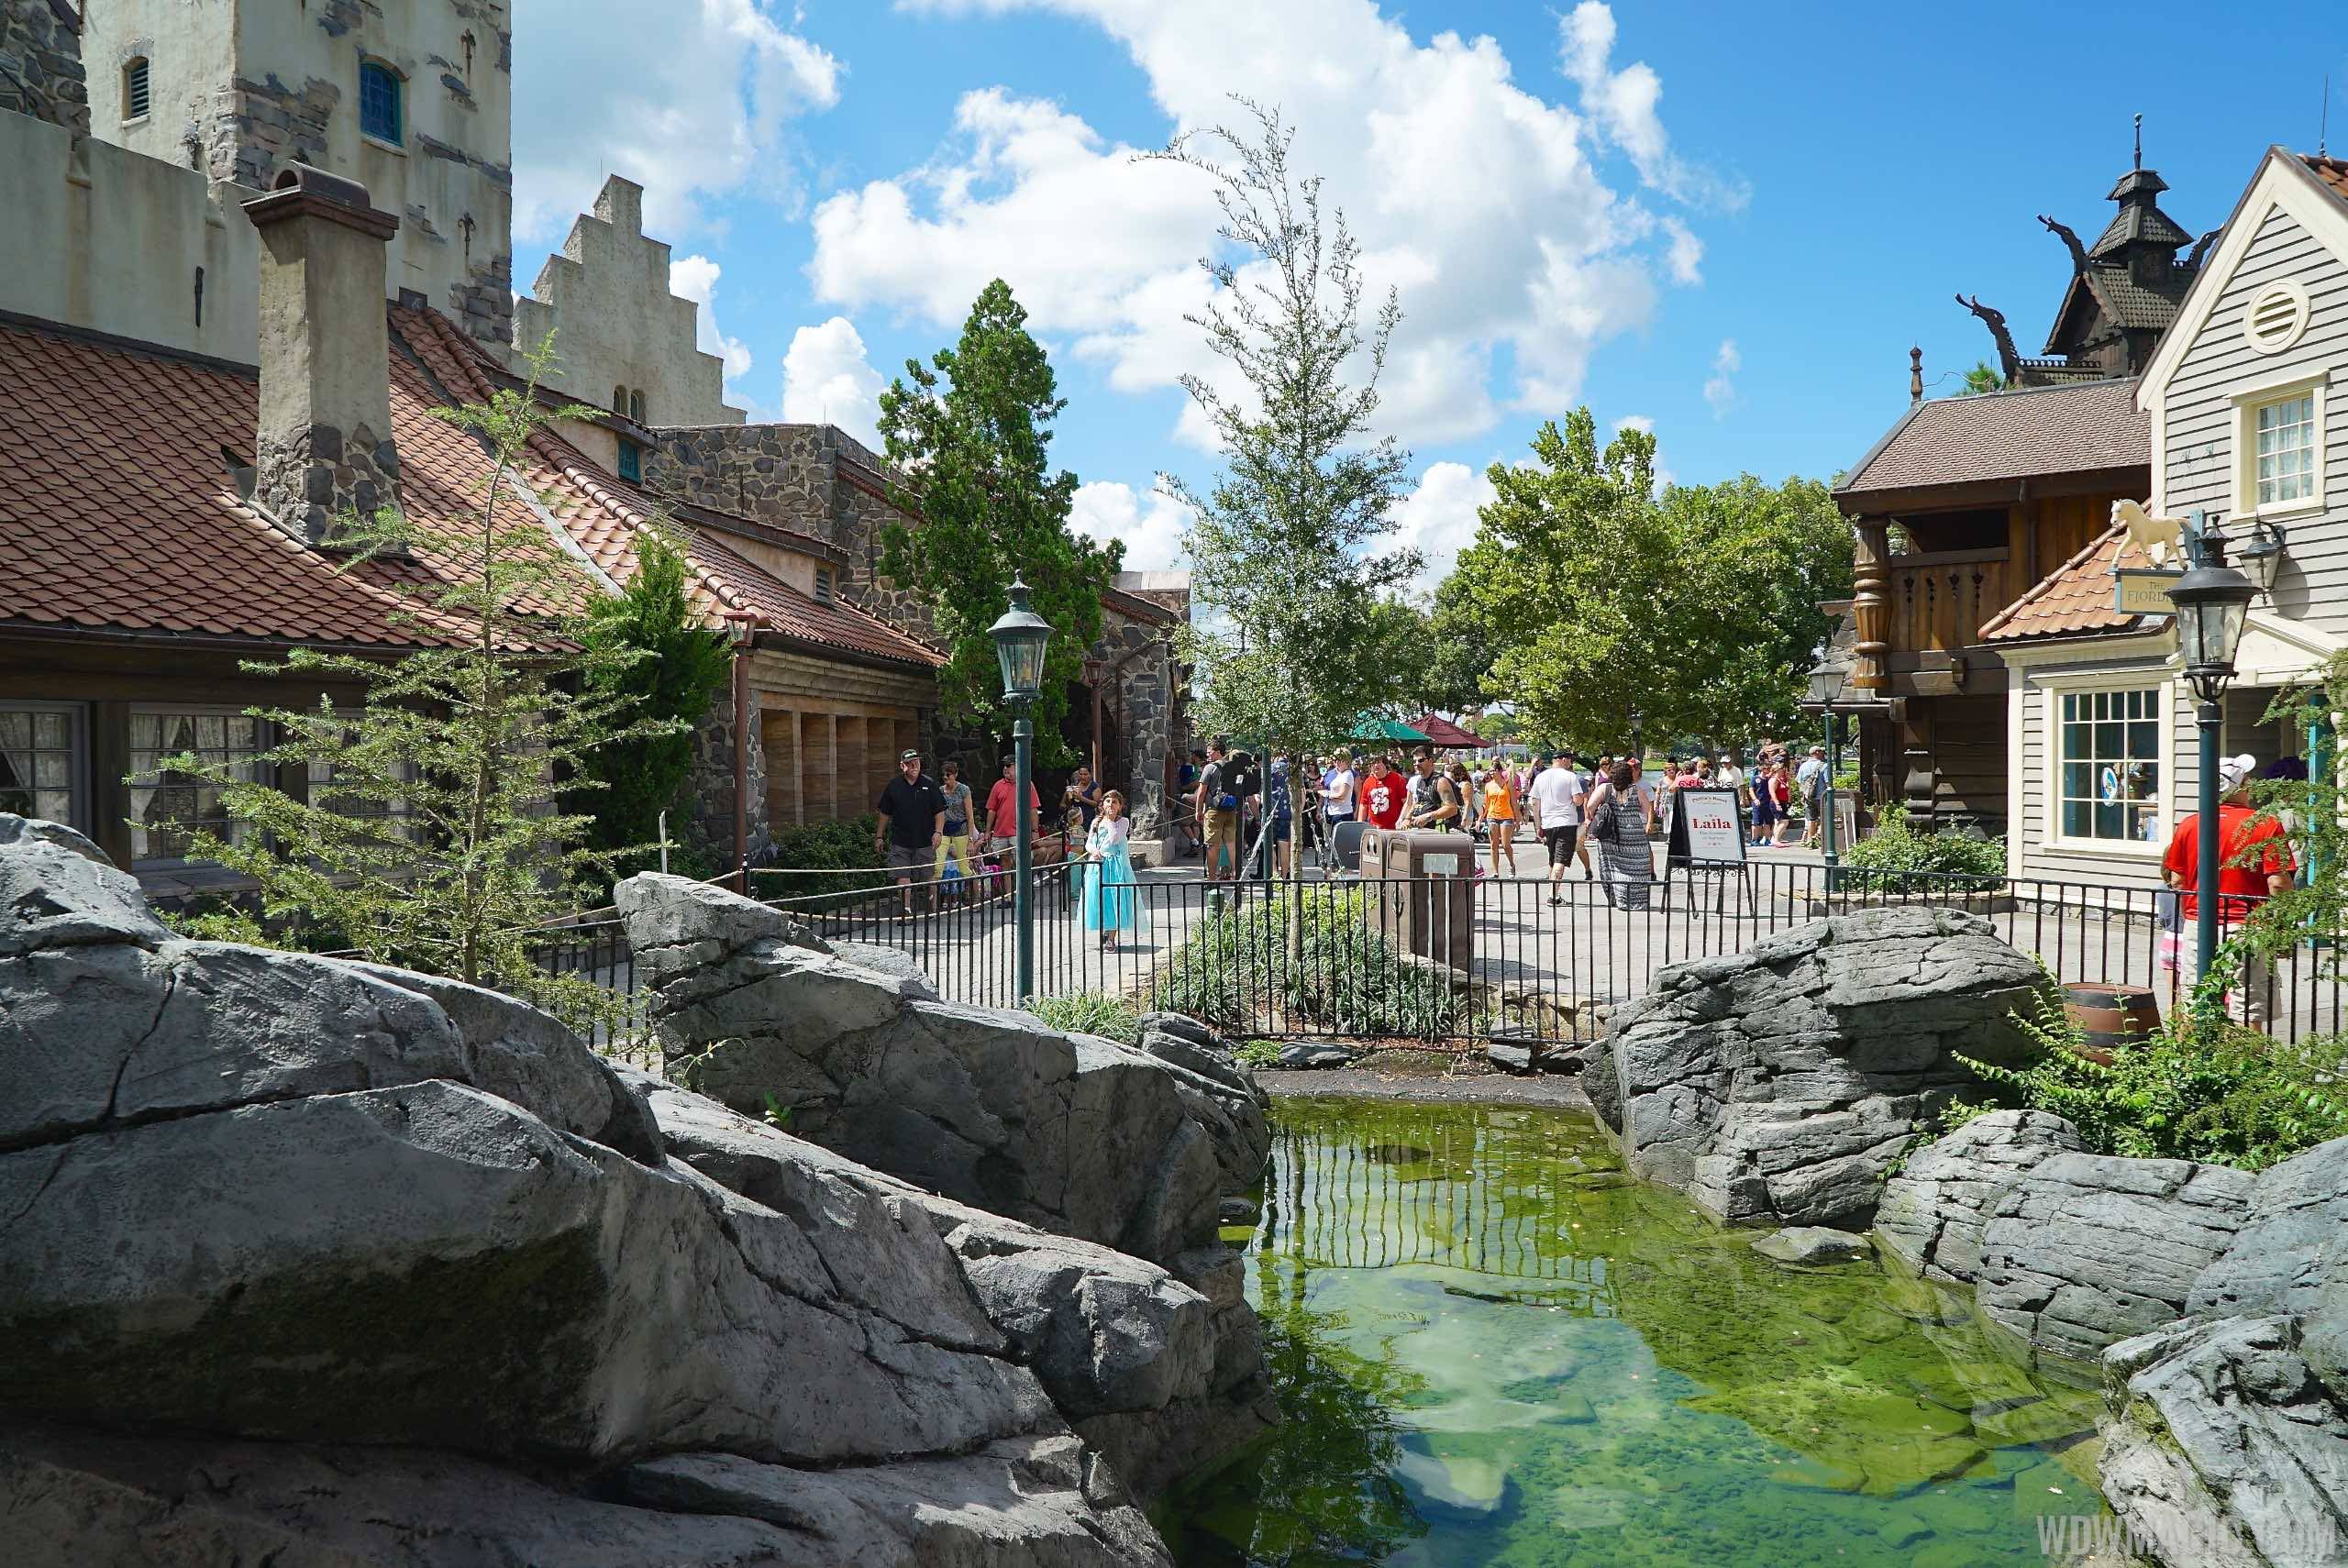 VIDEO - A look behind the walls at the Norway pavilion's new home for Anna and Elsa - the Royal Sommerhus